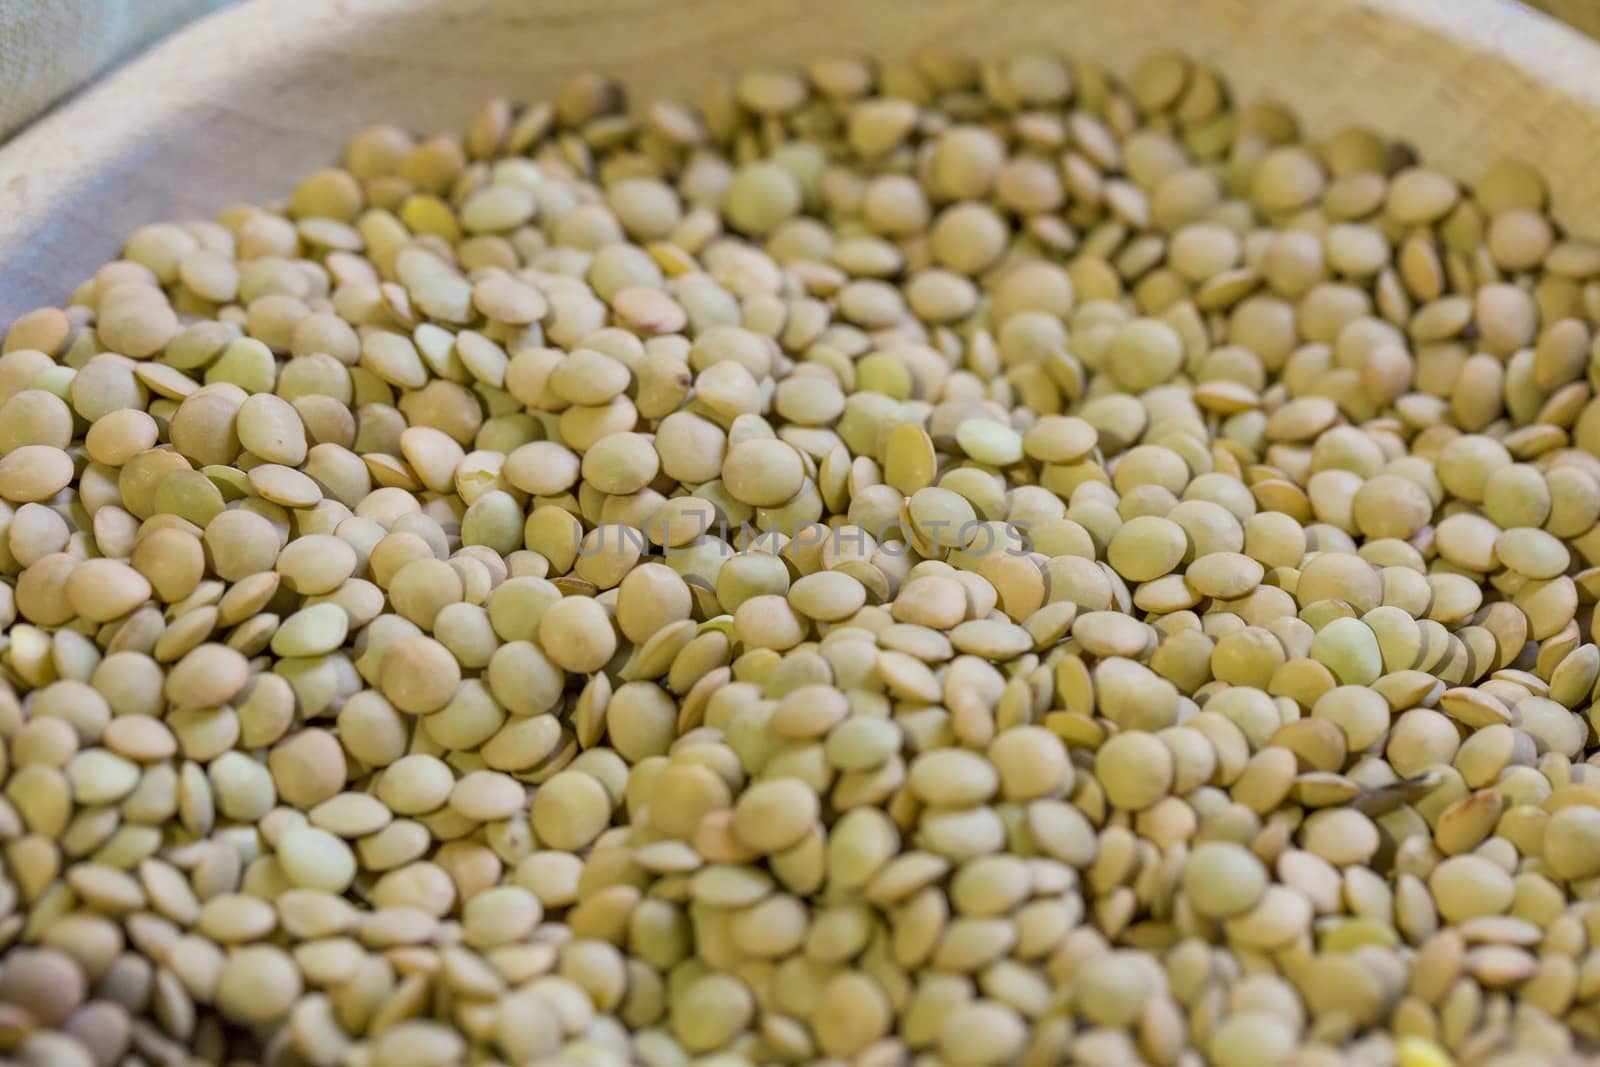 Picture of a bowl full of uncooked lentil